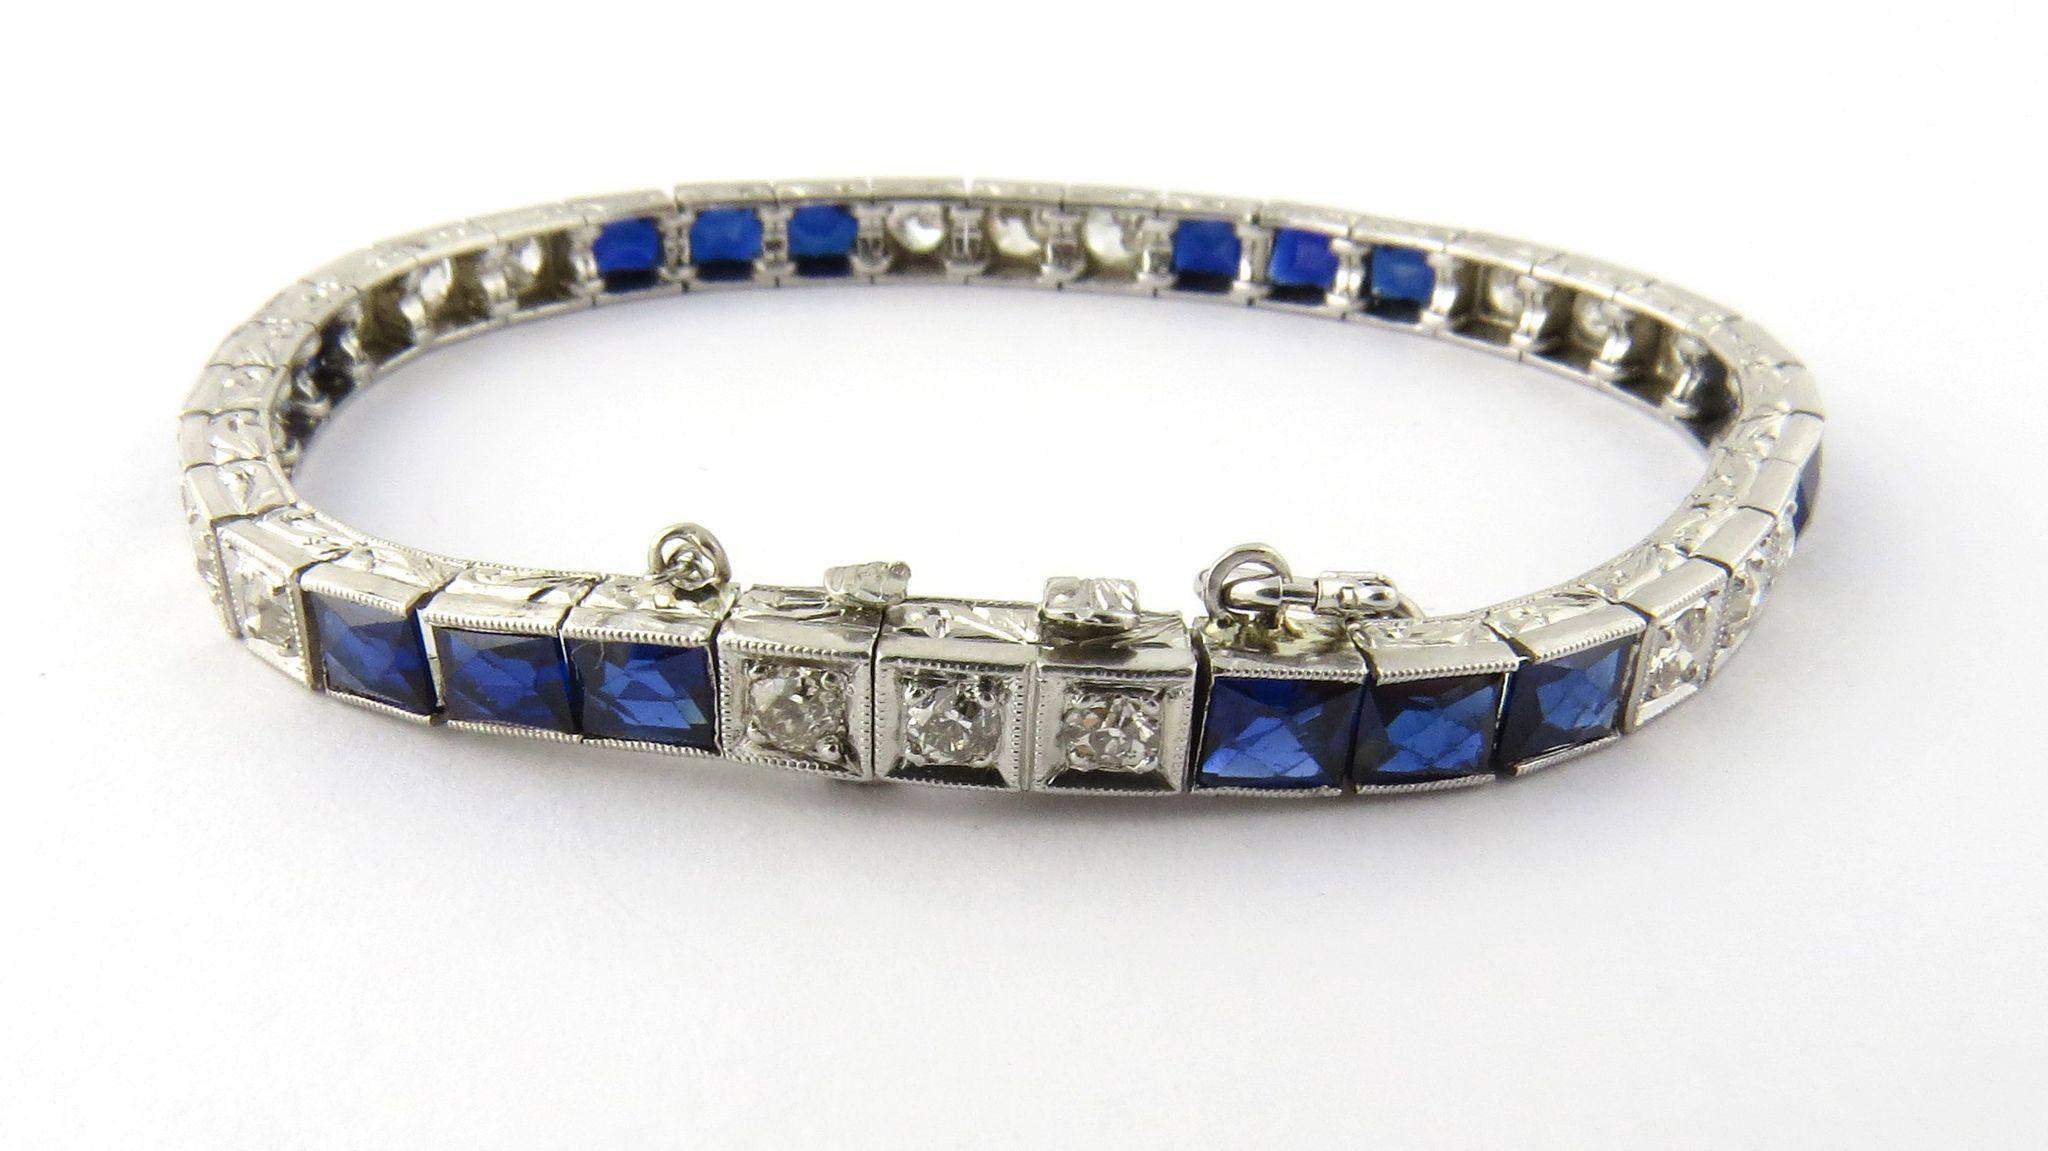 Antique Platinum Diamond and Sapphire Bracelet. 

Old miner cut diamonds and rectangle cut sapphires make up this gorgeous antique bracelet with safety chain. 

Underside latch, push button clasp and safety chain will keep this bracelet secure.